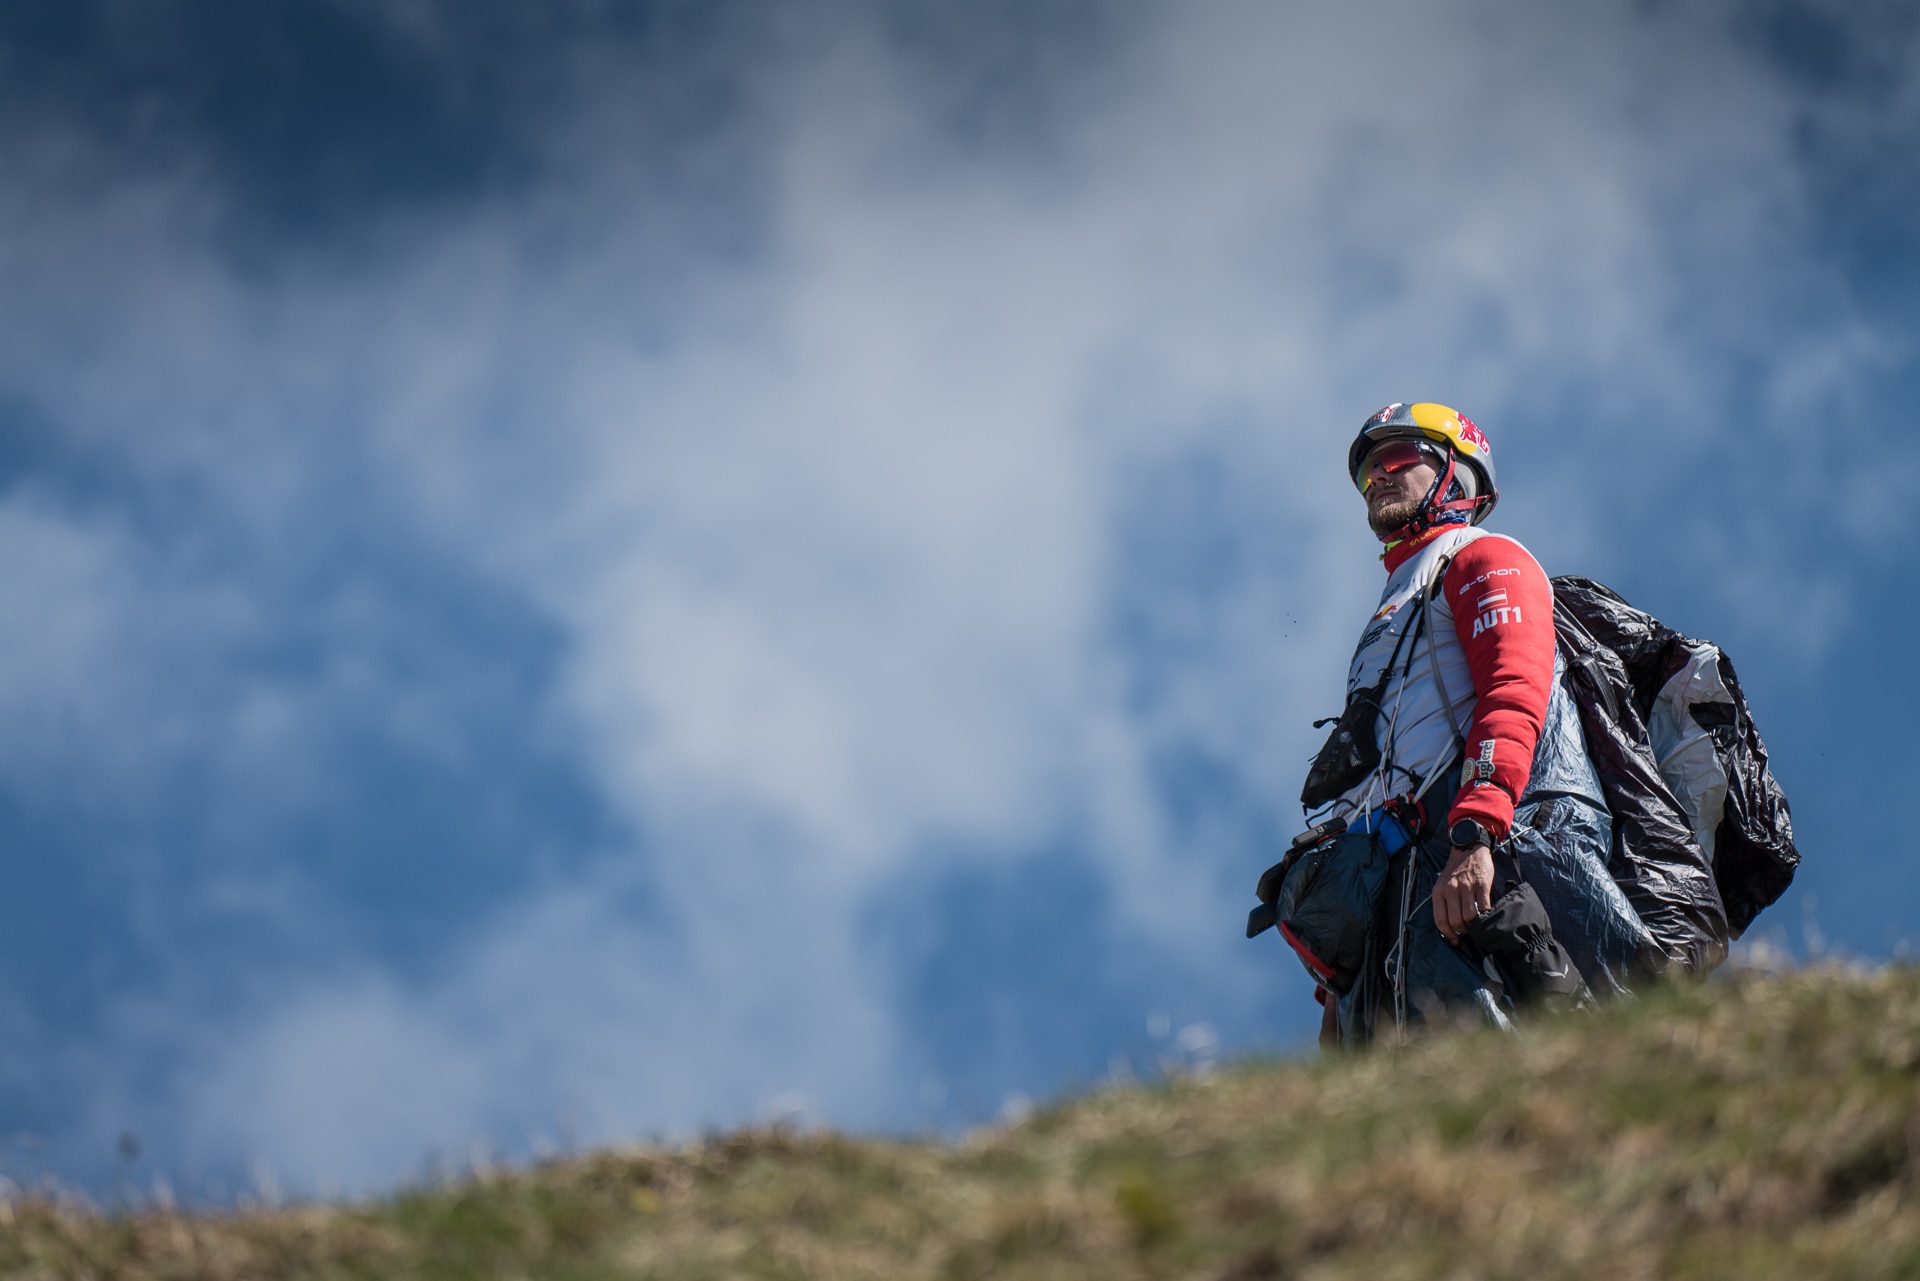 Paul Guschlbauer checking the weather conditions before his take off to the next Red Bull X-Alps turnpoint, June 19, 2019 // Philipp Reiter / Red Bull Content Pool // SI201906190309 // Usage for editorial use only //